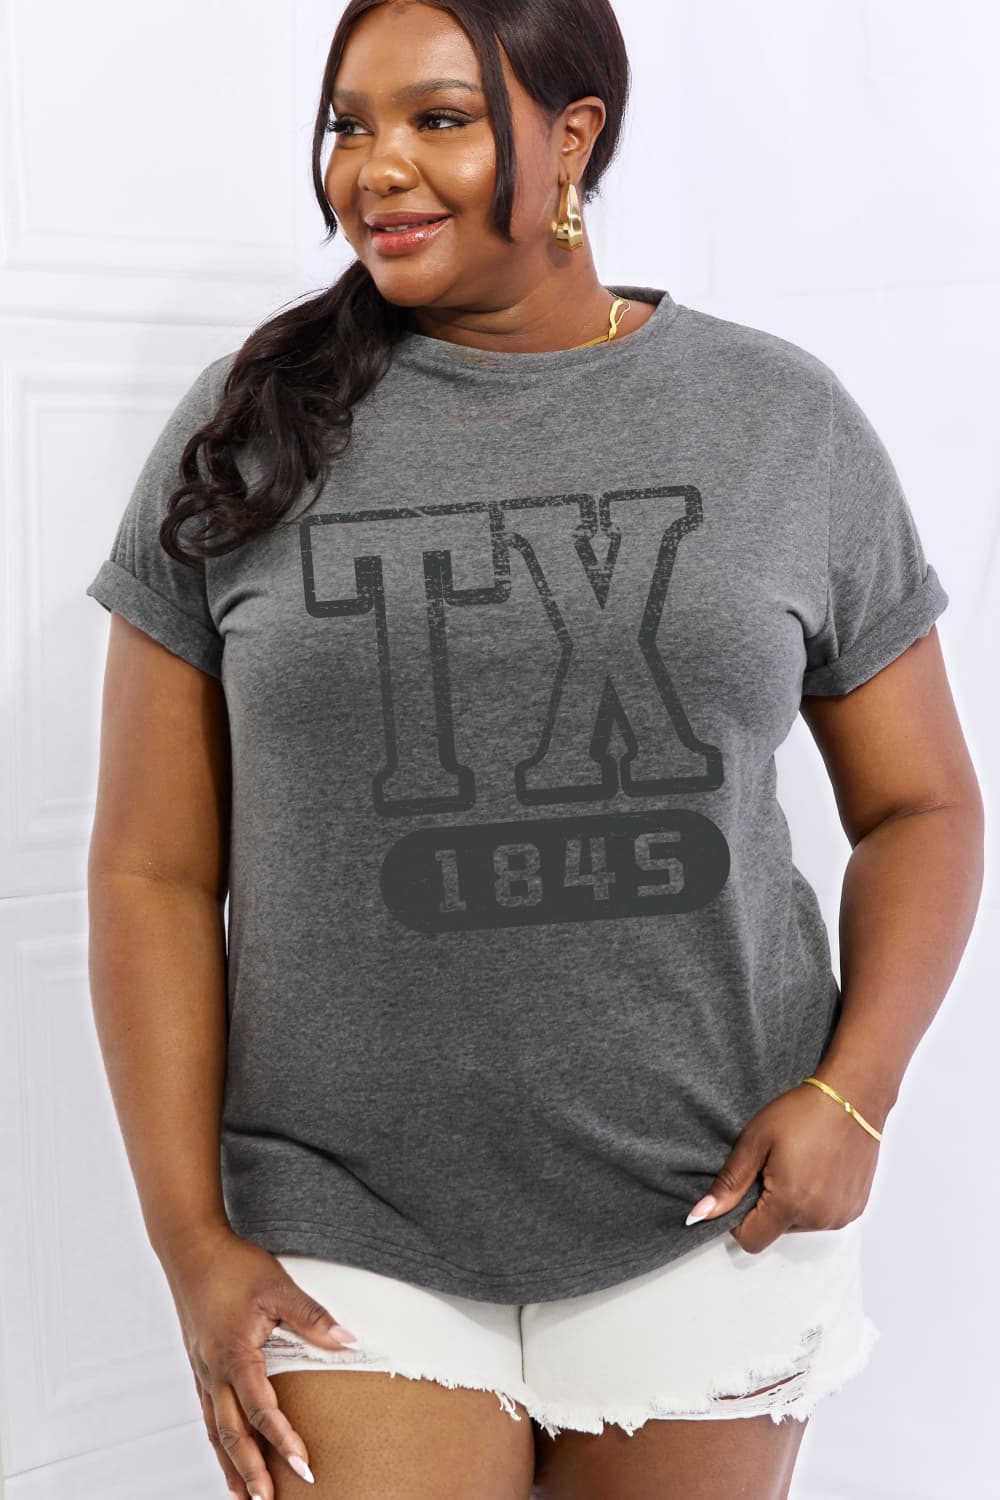 Simply Love Full Size TX 1845 Graphic Cotton Tee